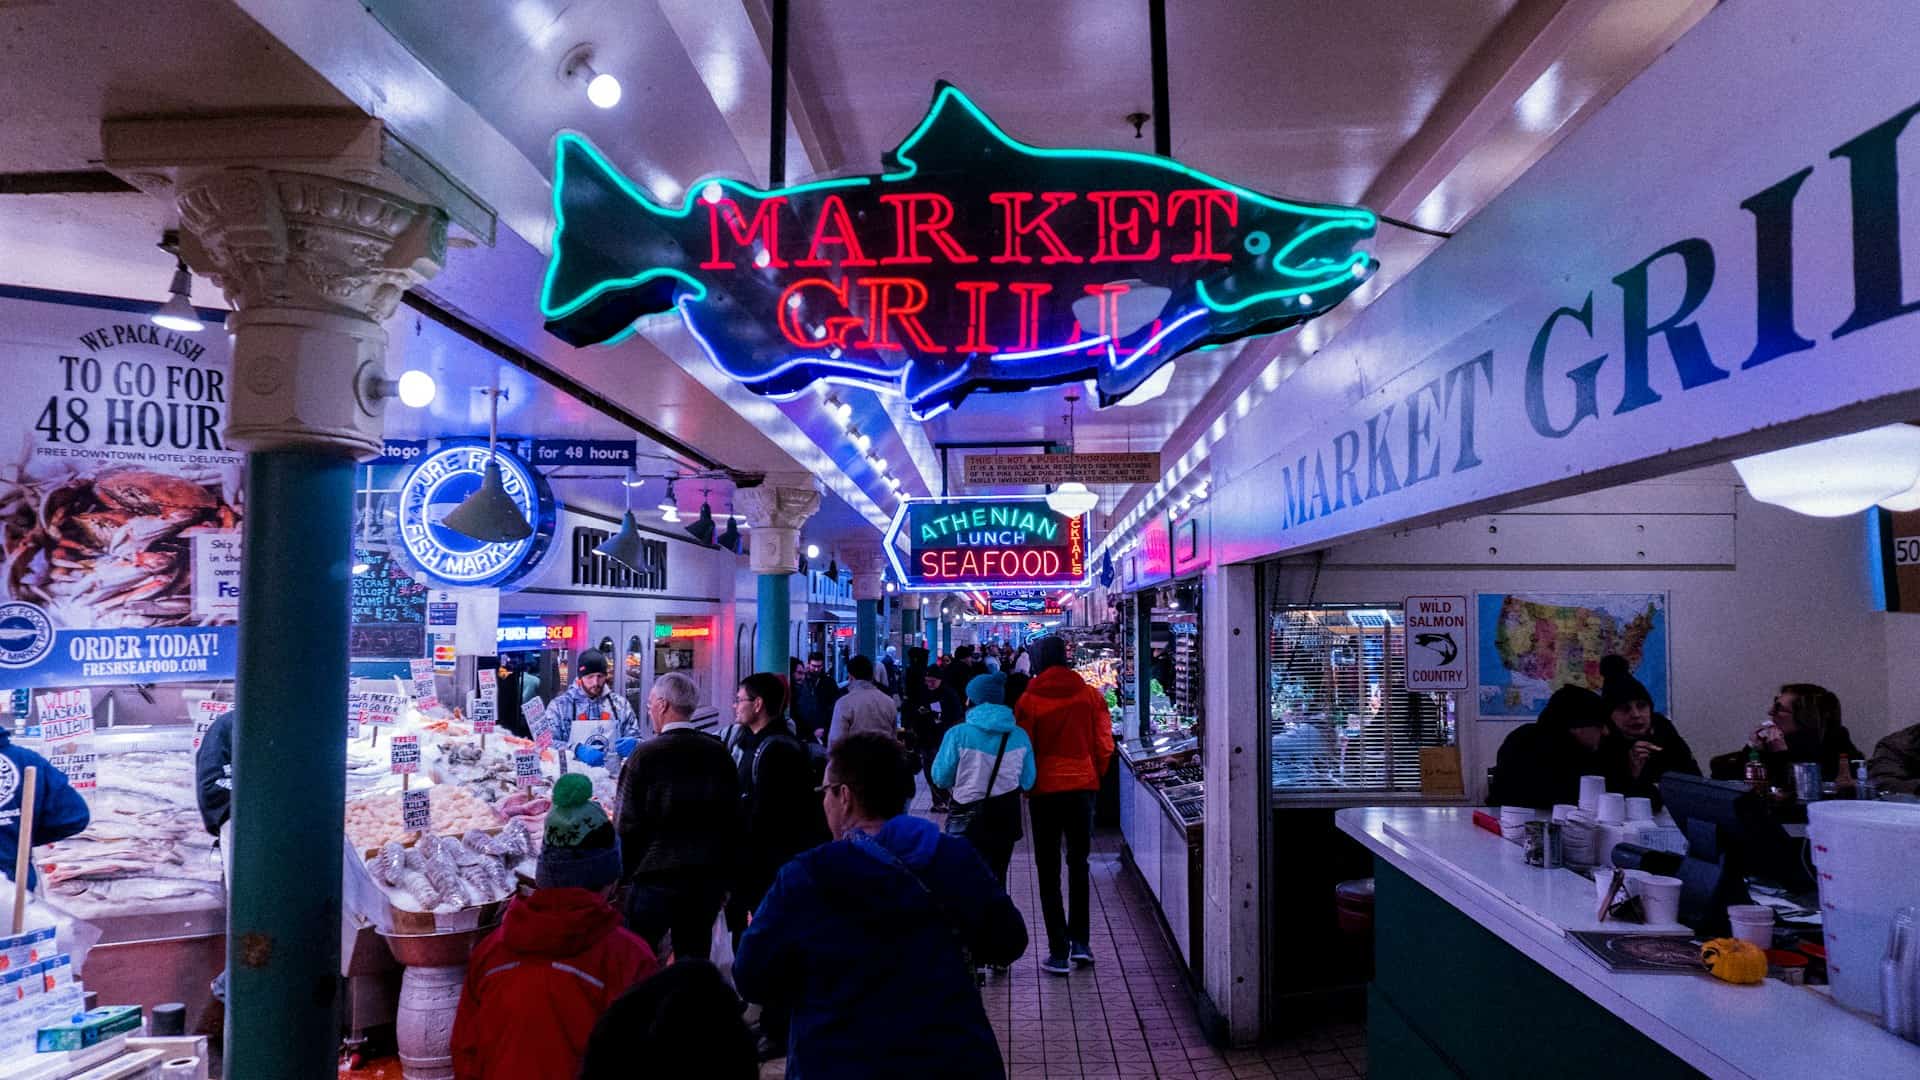 Best things to do in Seattle Washington - Christie Hudson - Market Grills at Pike Place Market by Gary on Unsplash